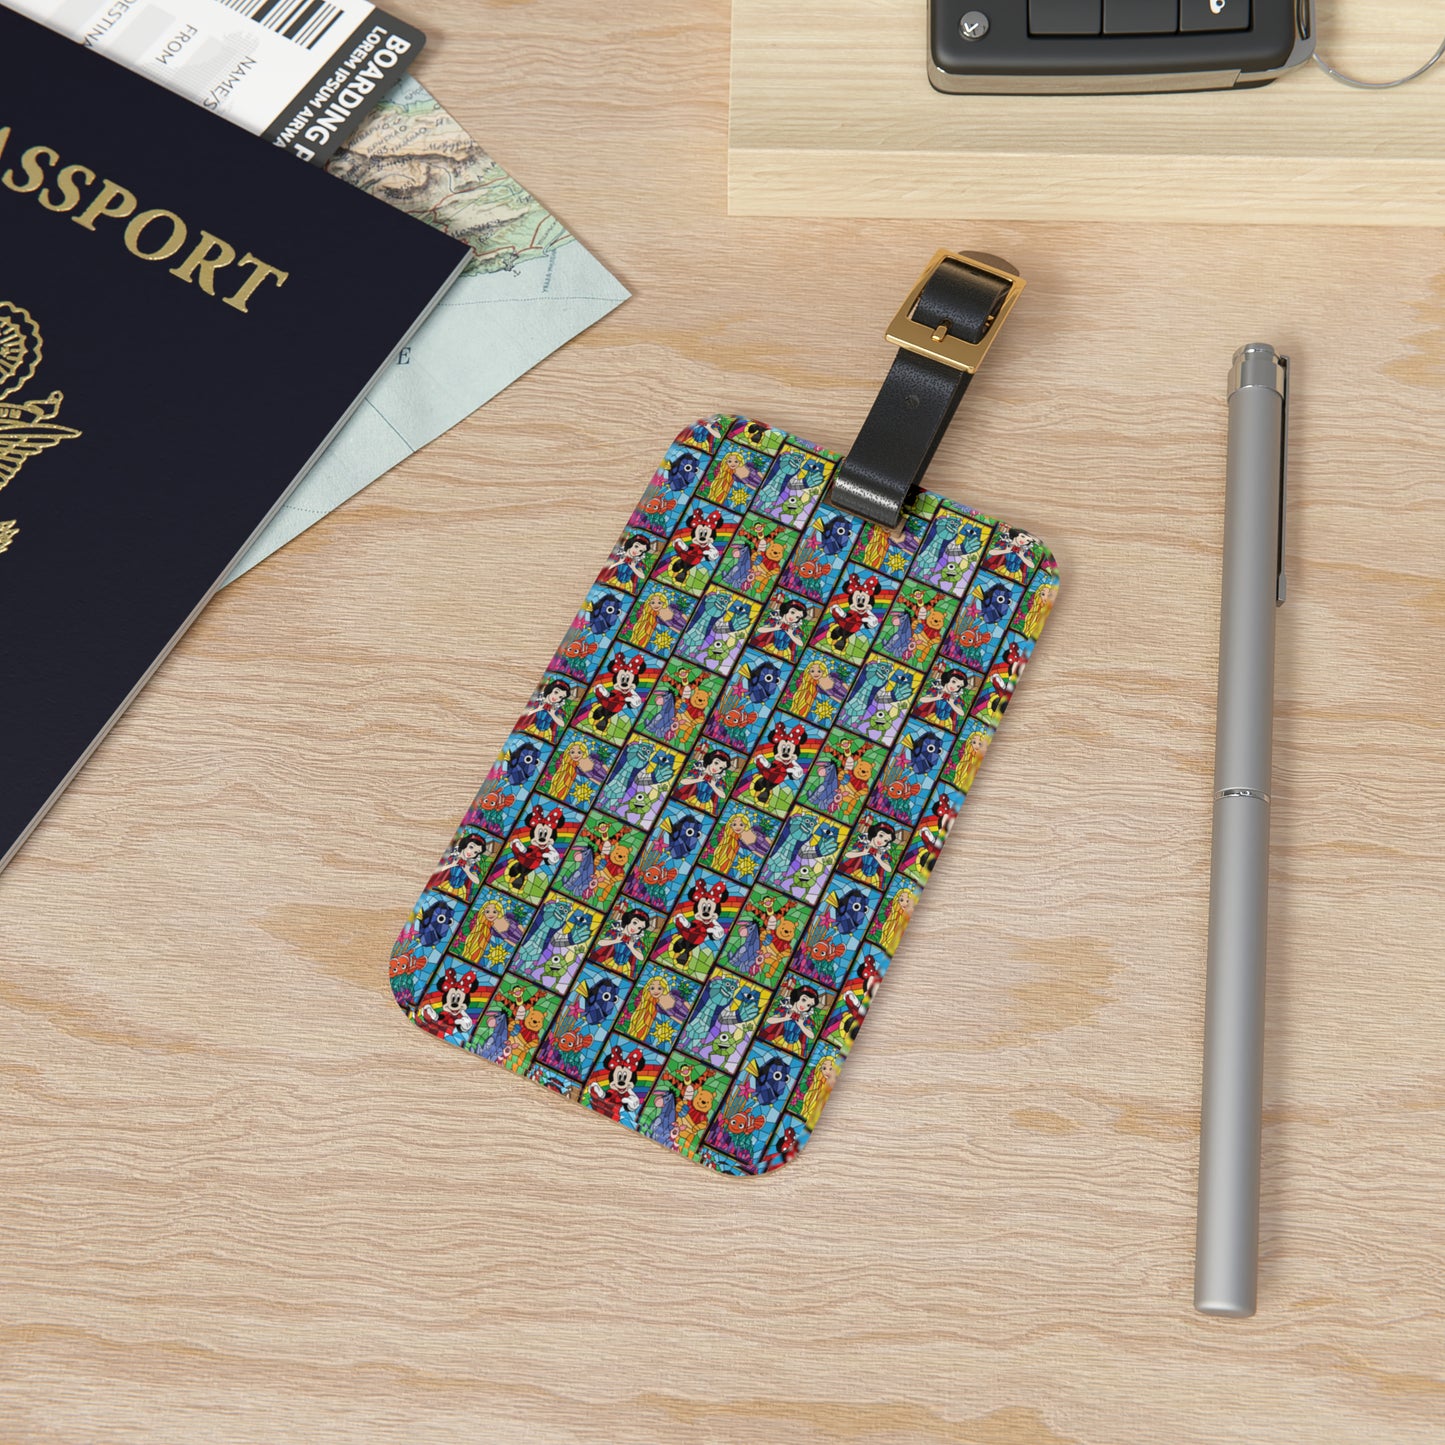 Stained Glass Characters Luggage Tag